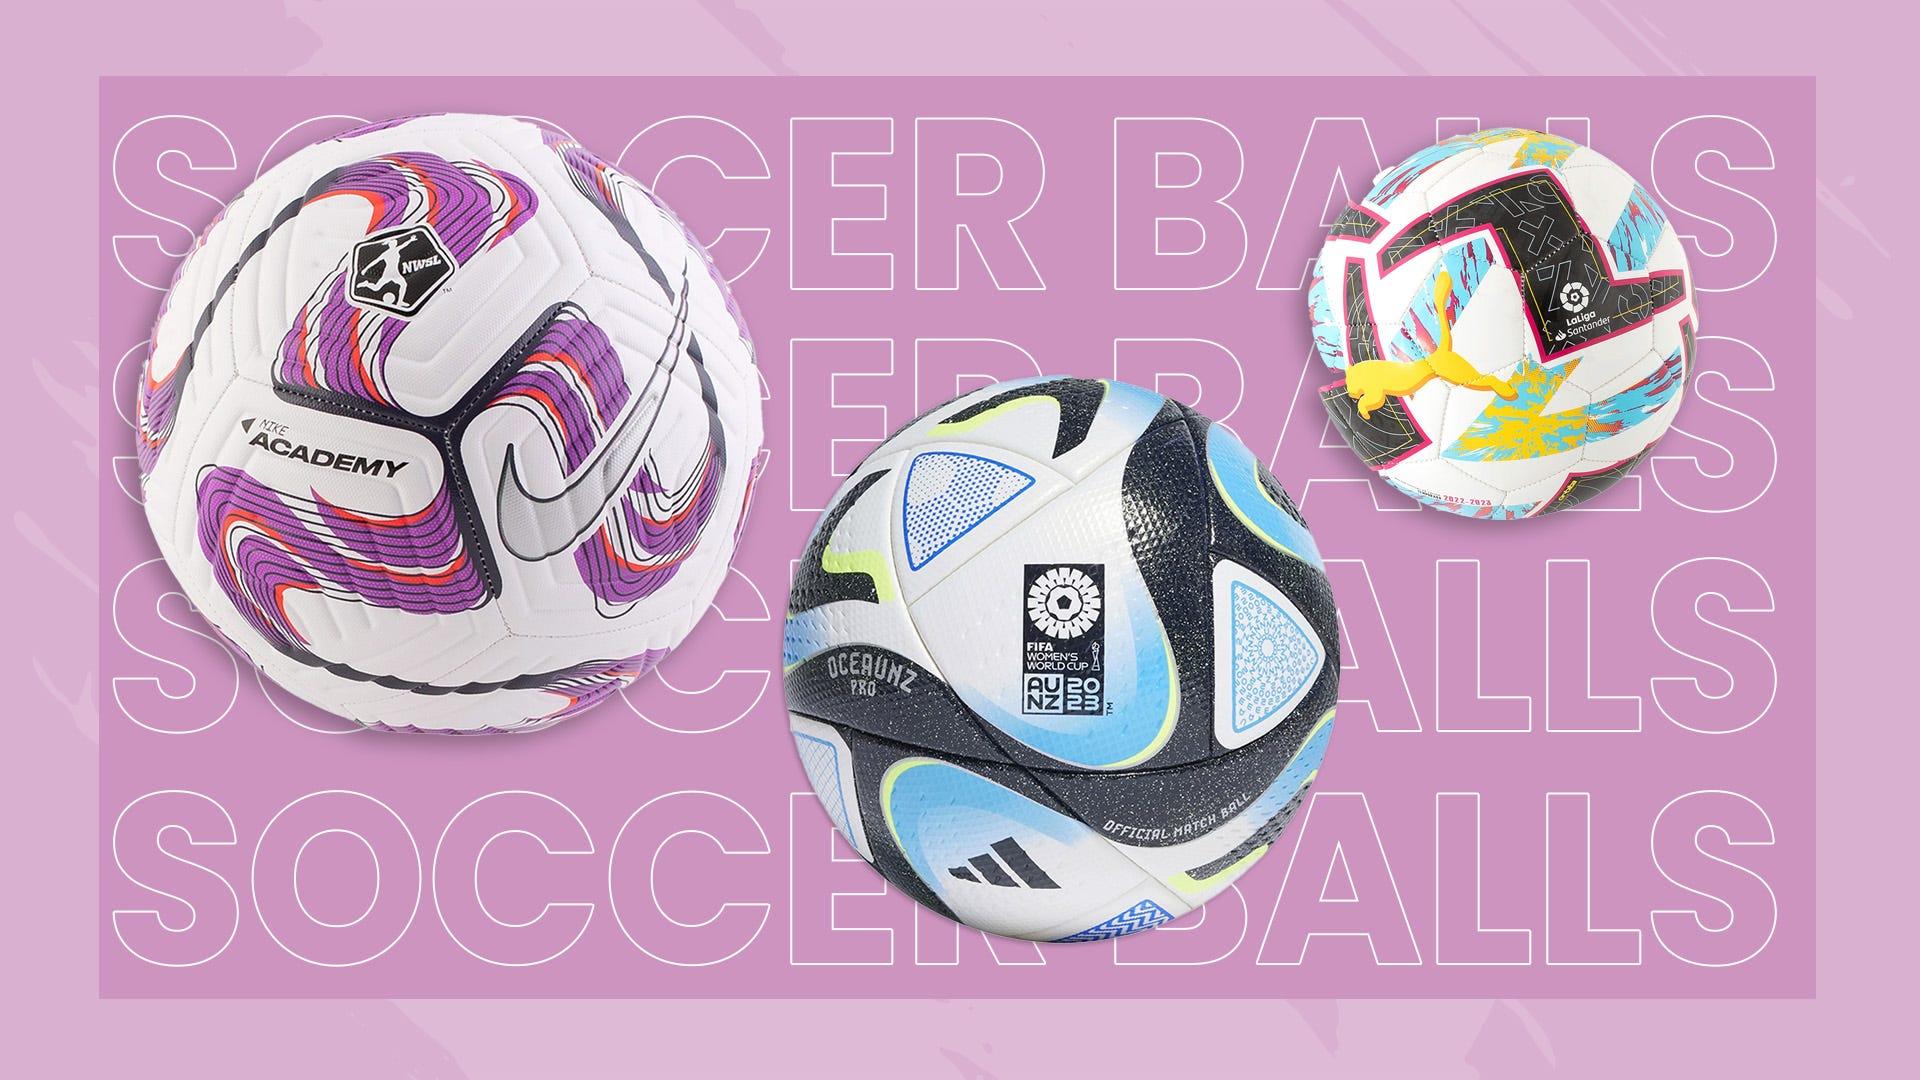 The Best Soccer Balls for Enthusiastic Players